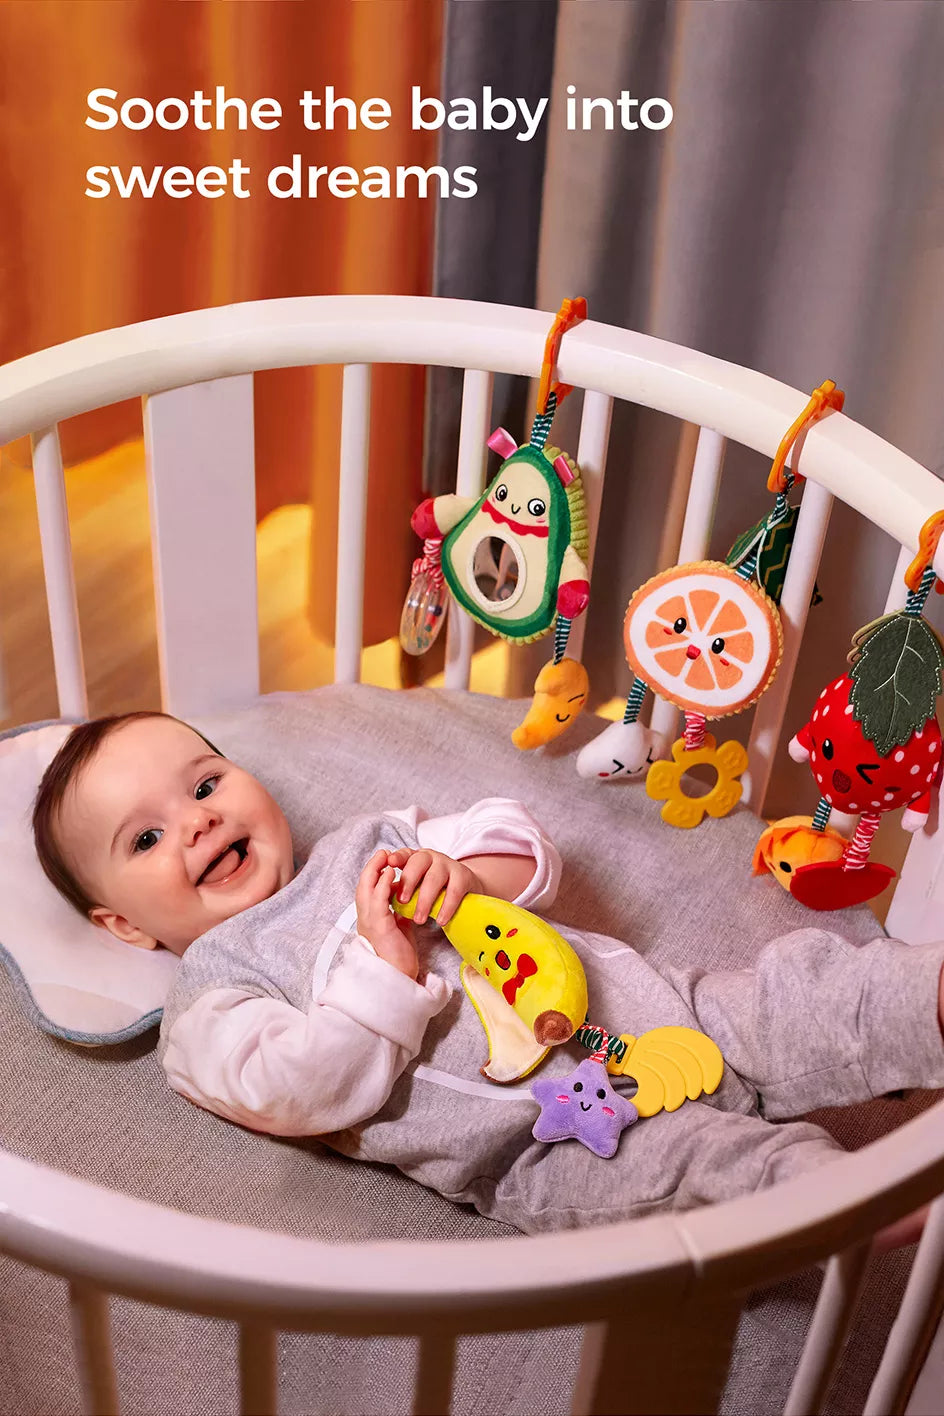 Baby toy hanging fruit rattle soothe zhe baby into sweet dreams